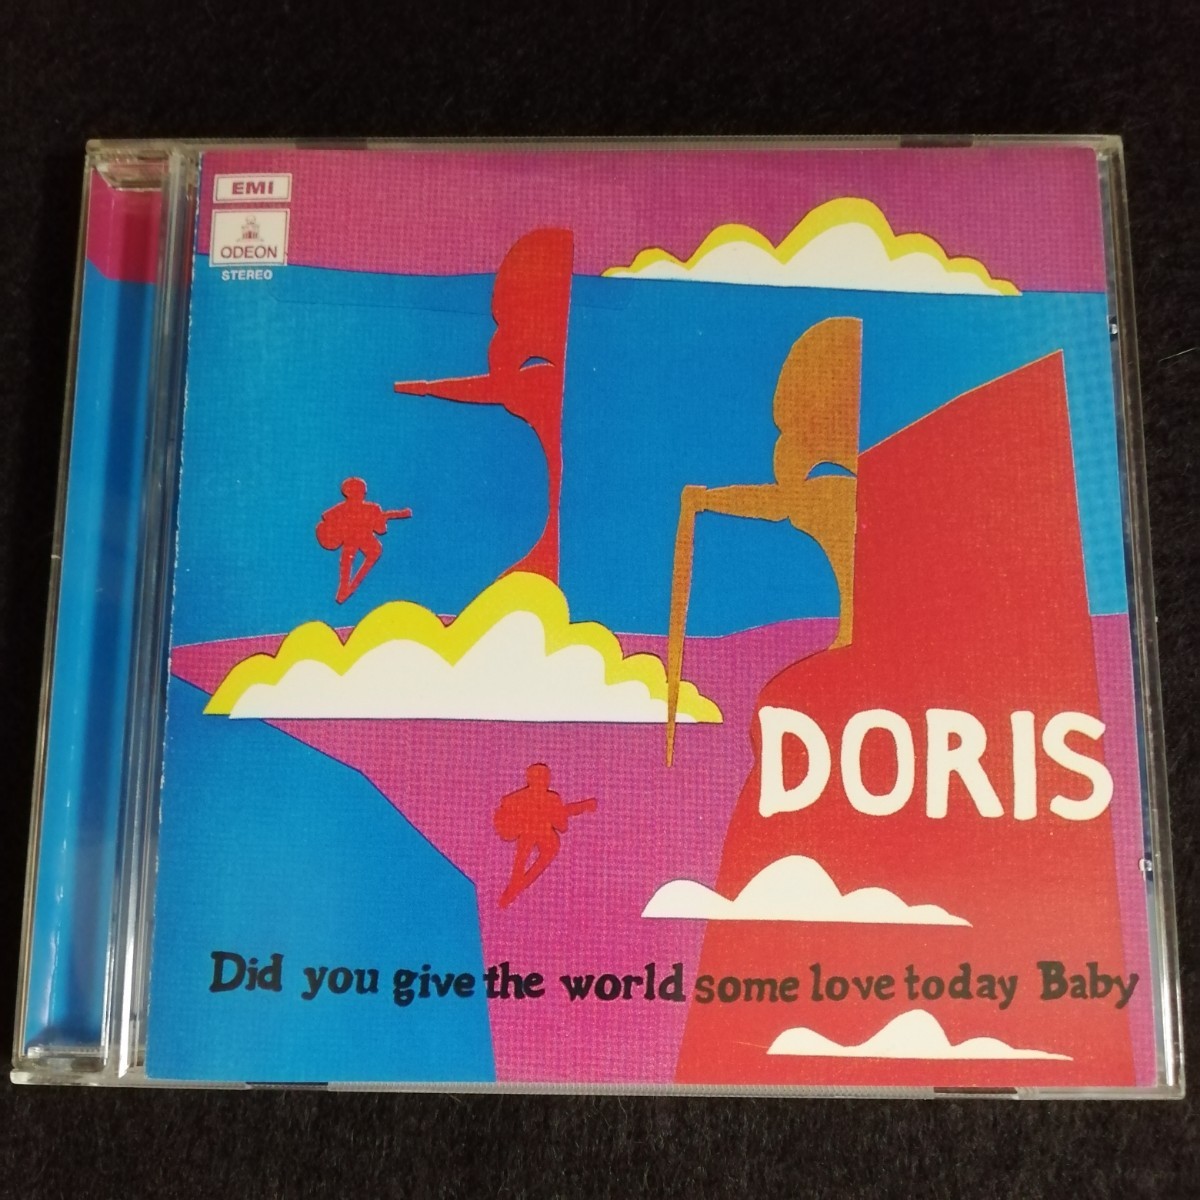 C11 中古CD ドリス DORIS did you give the world some love today baby スウェーデン産レアグルーヴ 女性ボーカルの画像1